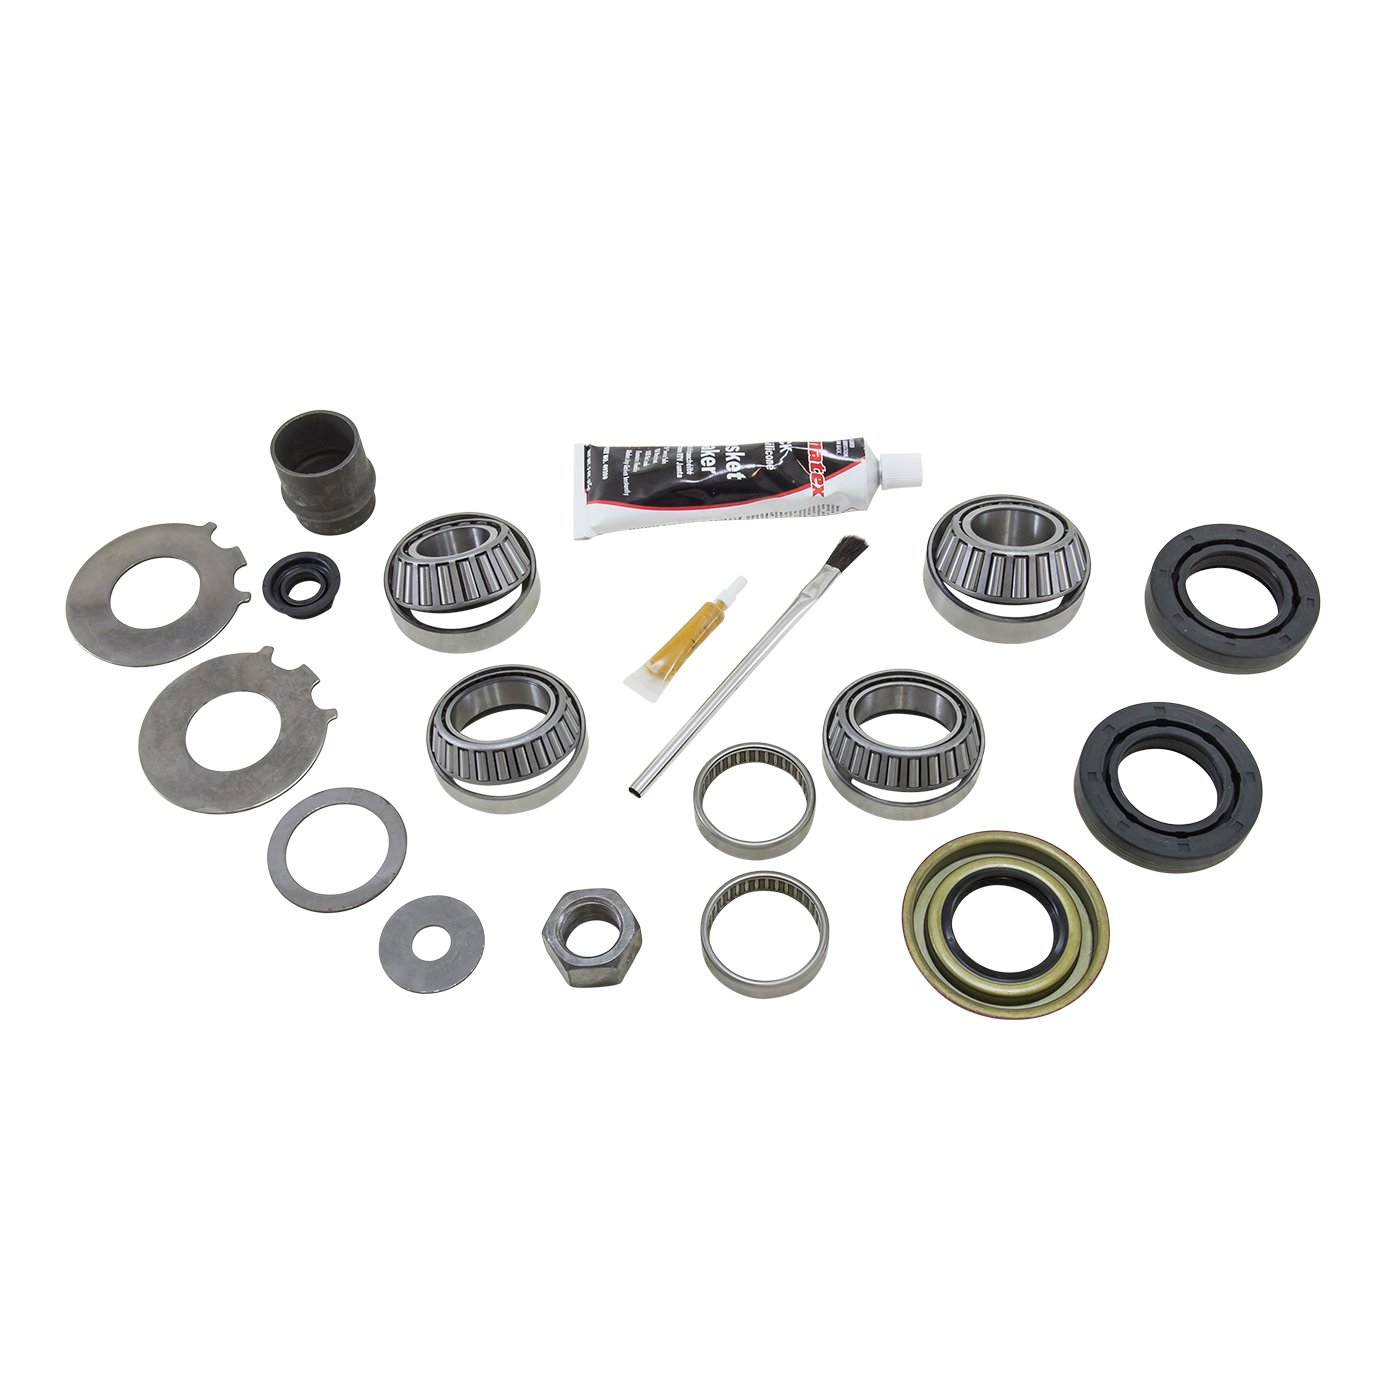 Bearing Install Kit For '98 And Newer GM